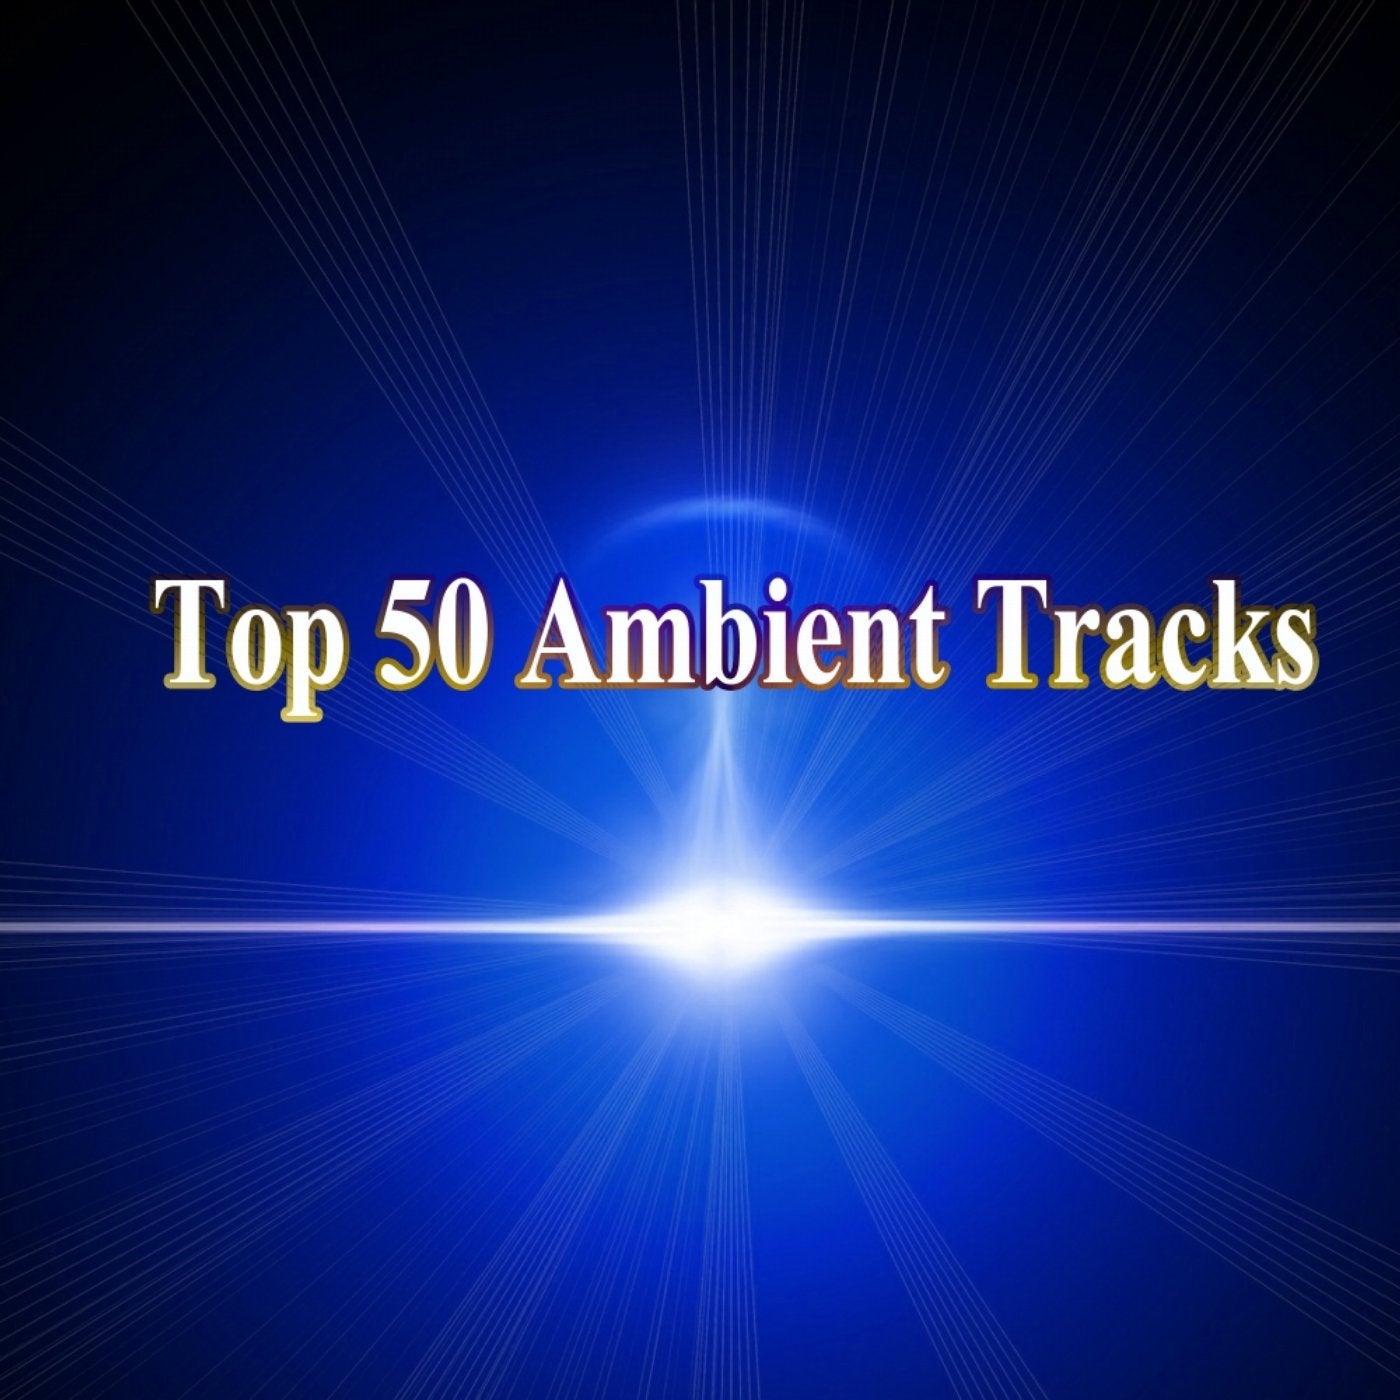 Top 50 Ambient Tracks